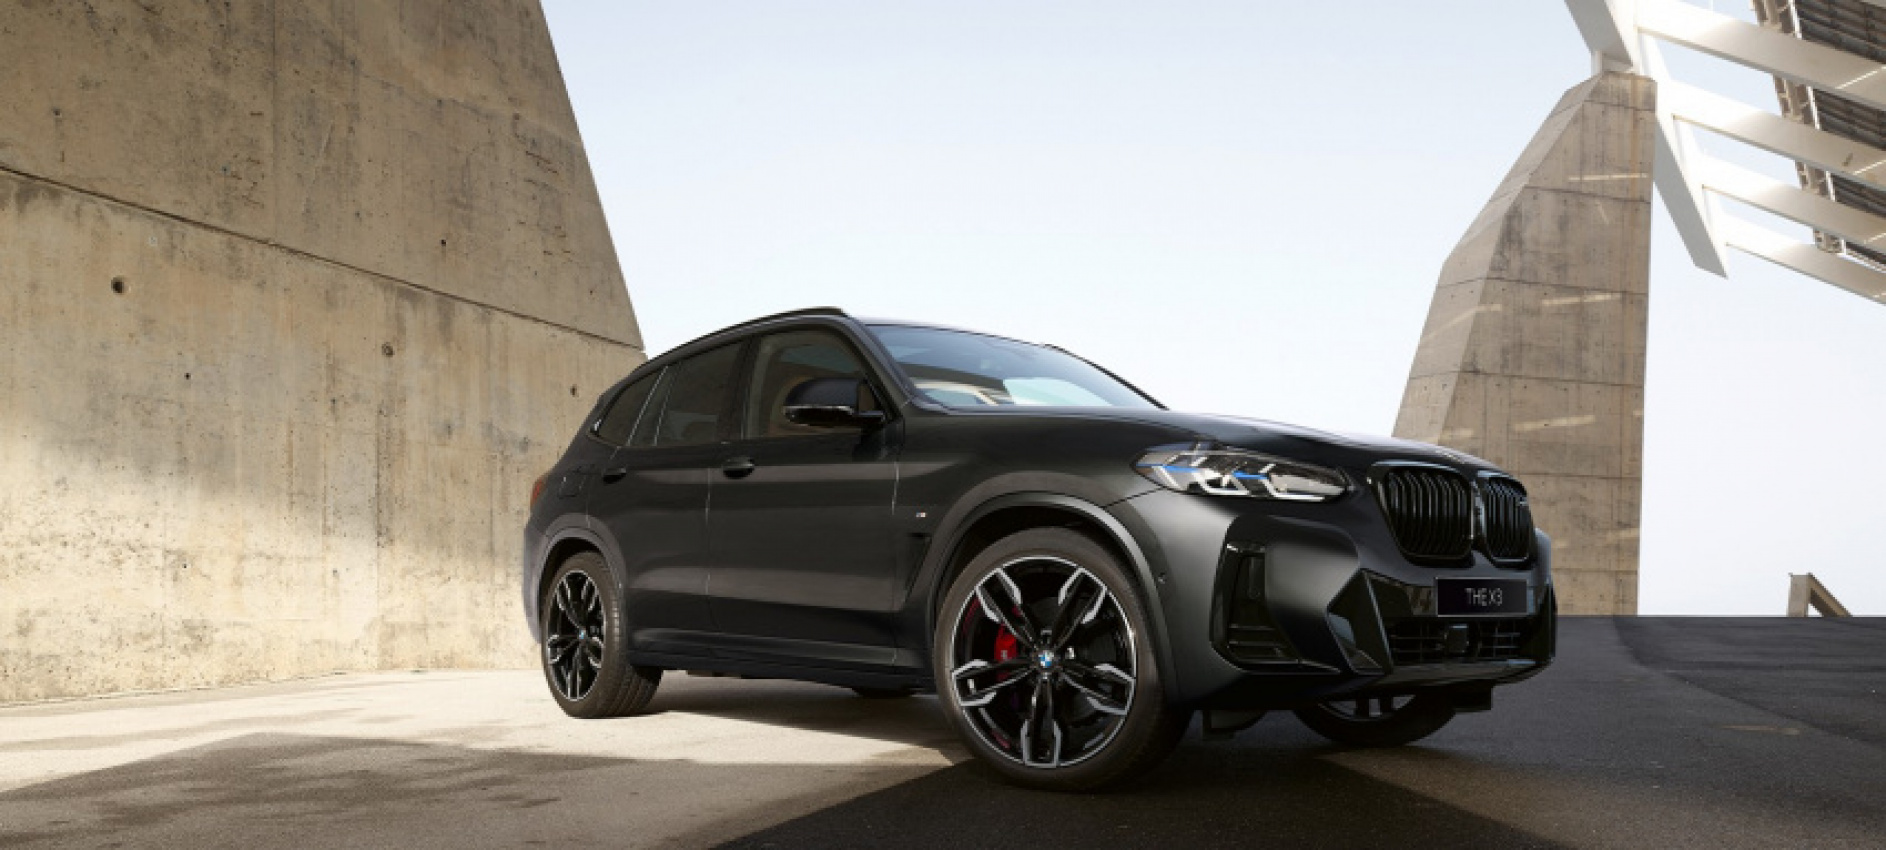 autos, bmw, cars, android, bmw x3, bmw x3 m40i, bmw x4 m40i, x3 m40i, x4 m40i, android, bmw x3 m40i and x4 m40i frozen edition revealed with sinister look